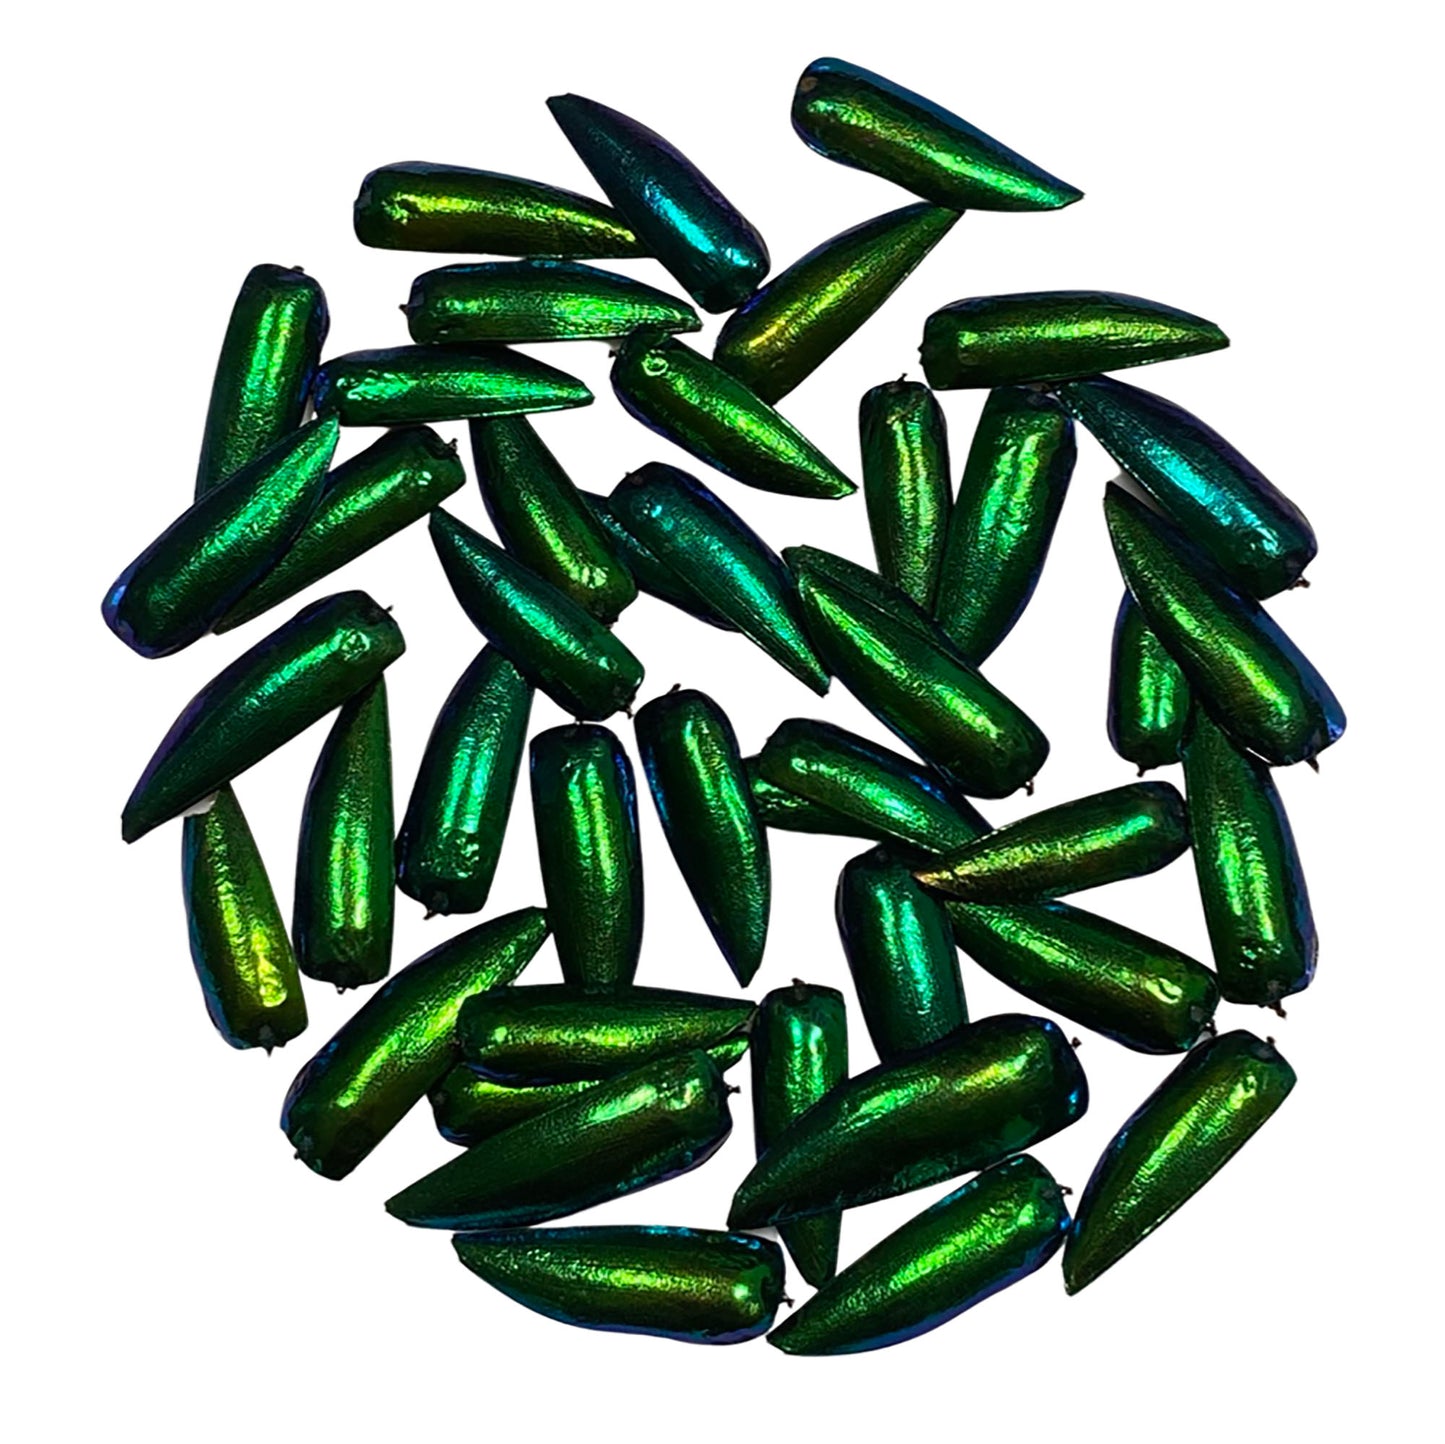 Jewel Beetle Wings UNDRILLED NO-HOLE 100 Pcs Natural Wings - Metallic Iridescent Green